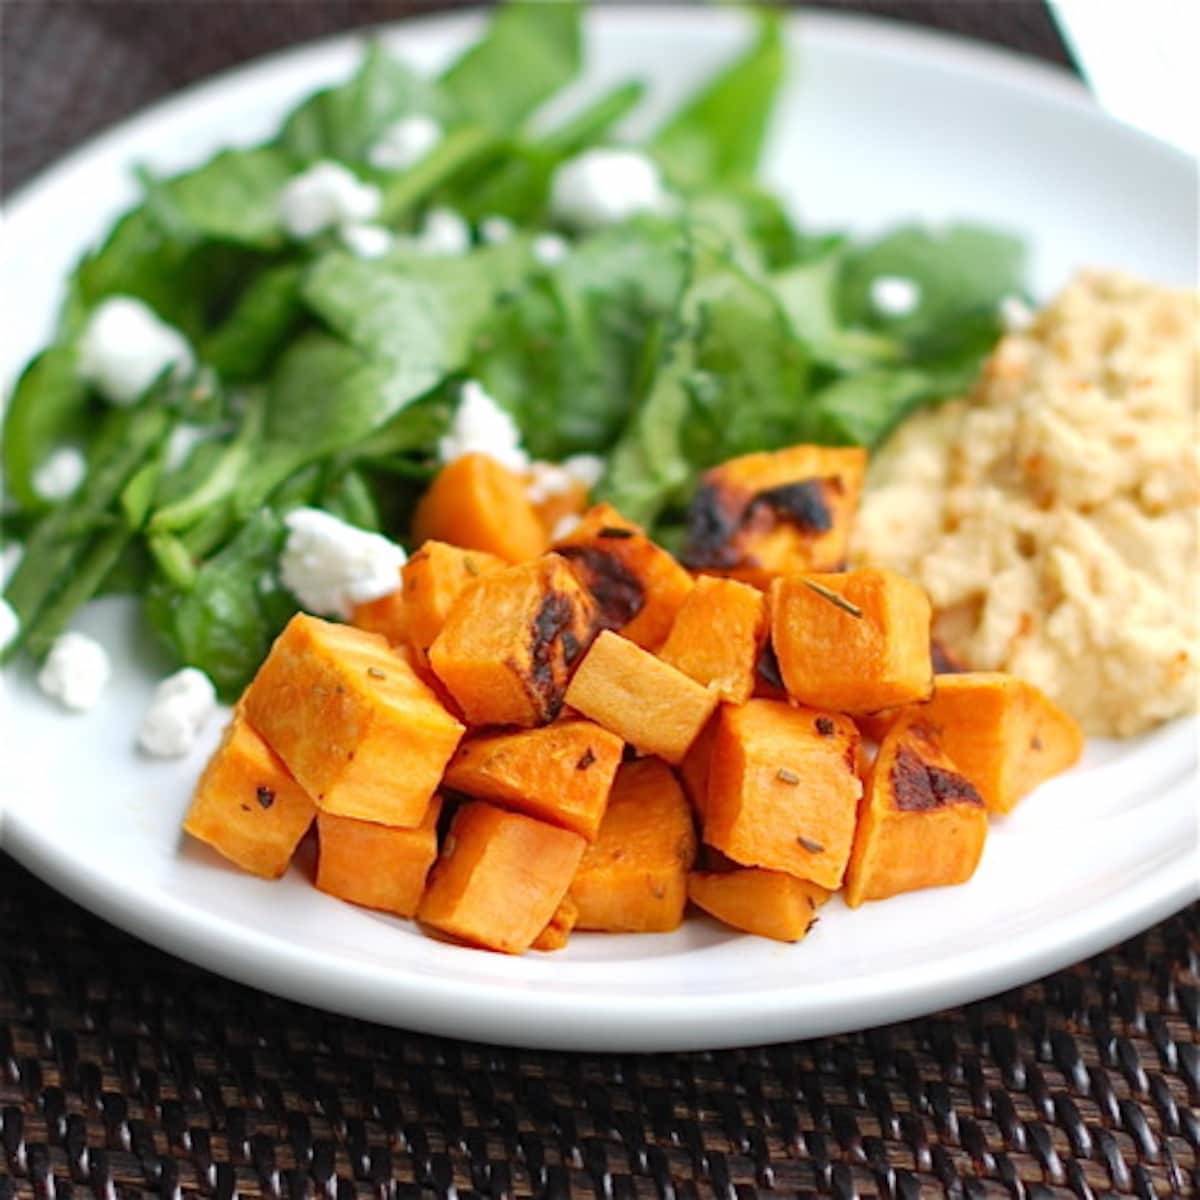 Roasted sweet potatoes  with a side of hummus and a spinach salad. 